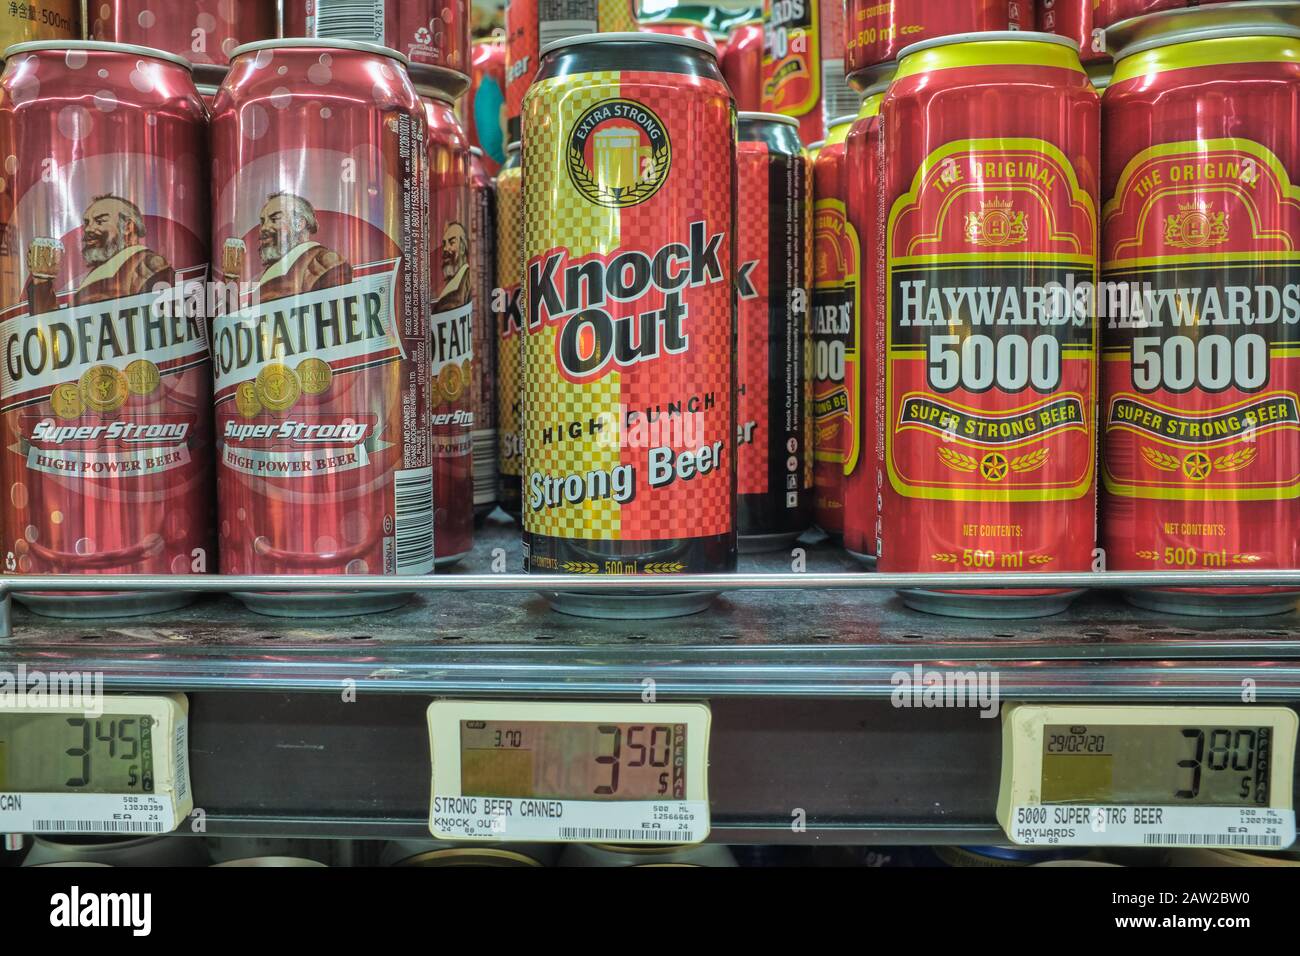 Brands of Indian strong beer in a supermarket in Singapore: the promisingly named 'Knock Out (High Punch)', and Haywards 5000 and Godfather Stock Photo